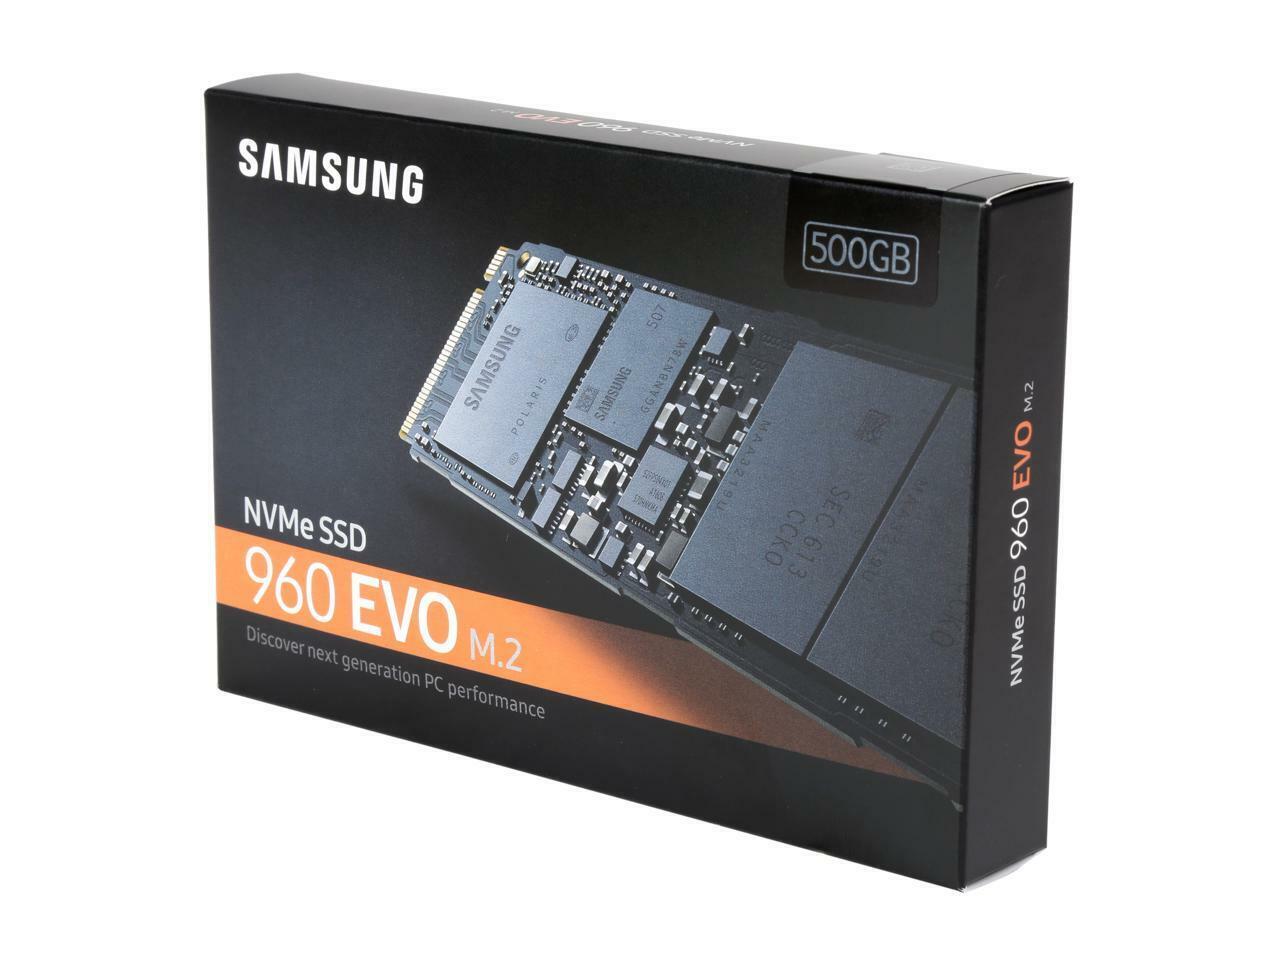 At opdage kampagne deres SAMSUNG 960 EVO M.2 500gb NVMe PCI-Express 3.0 Solid State Drive SSD  MZ-V6E500BW 887276185293 | eBay